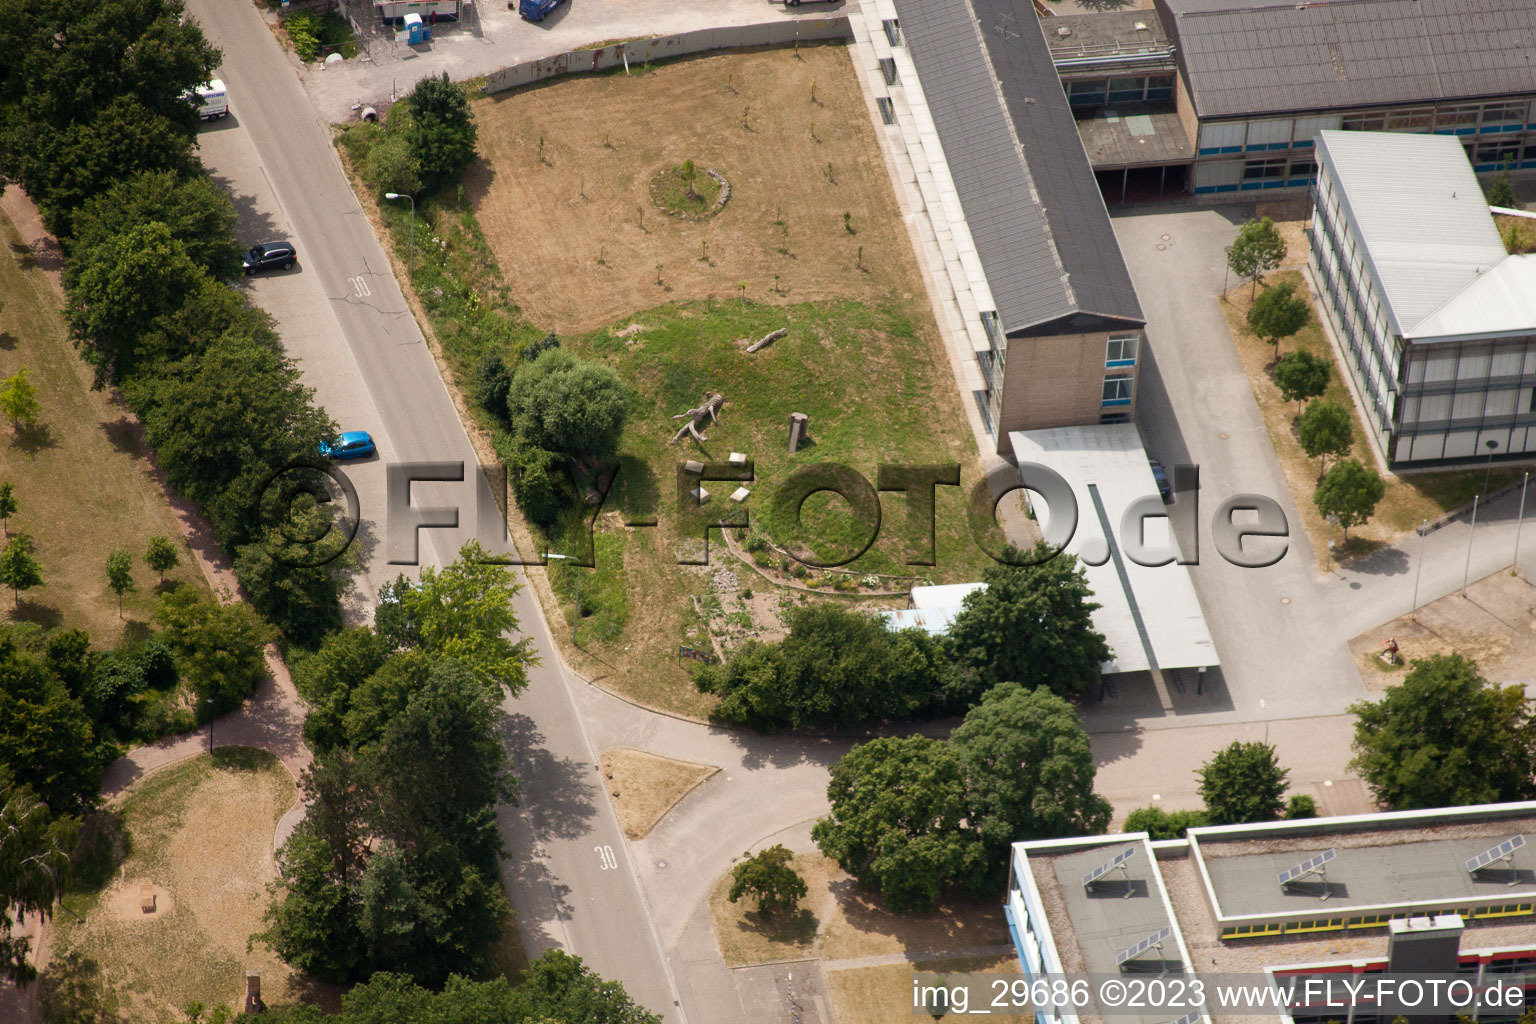 Aerial photograpy of IGS school garden in Kandel in the state Rhineland-Palatinate, Germany